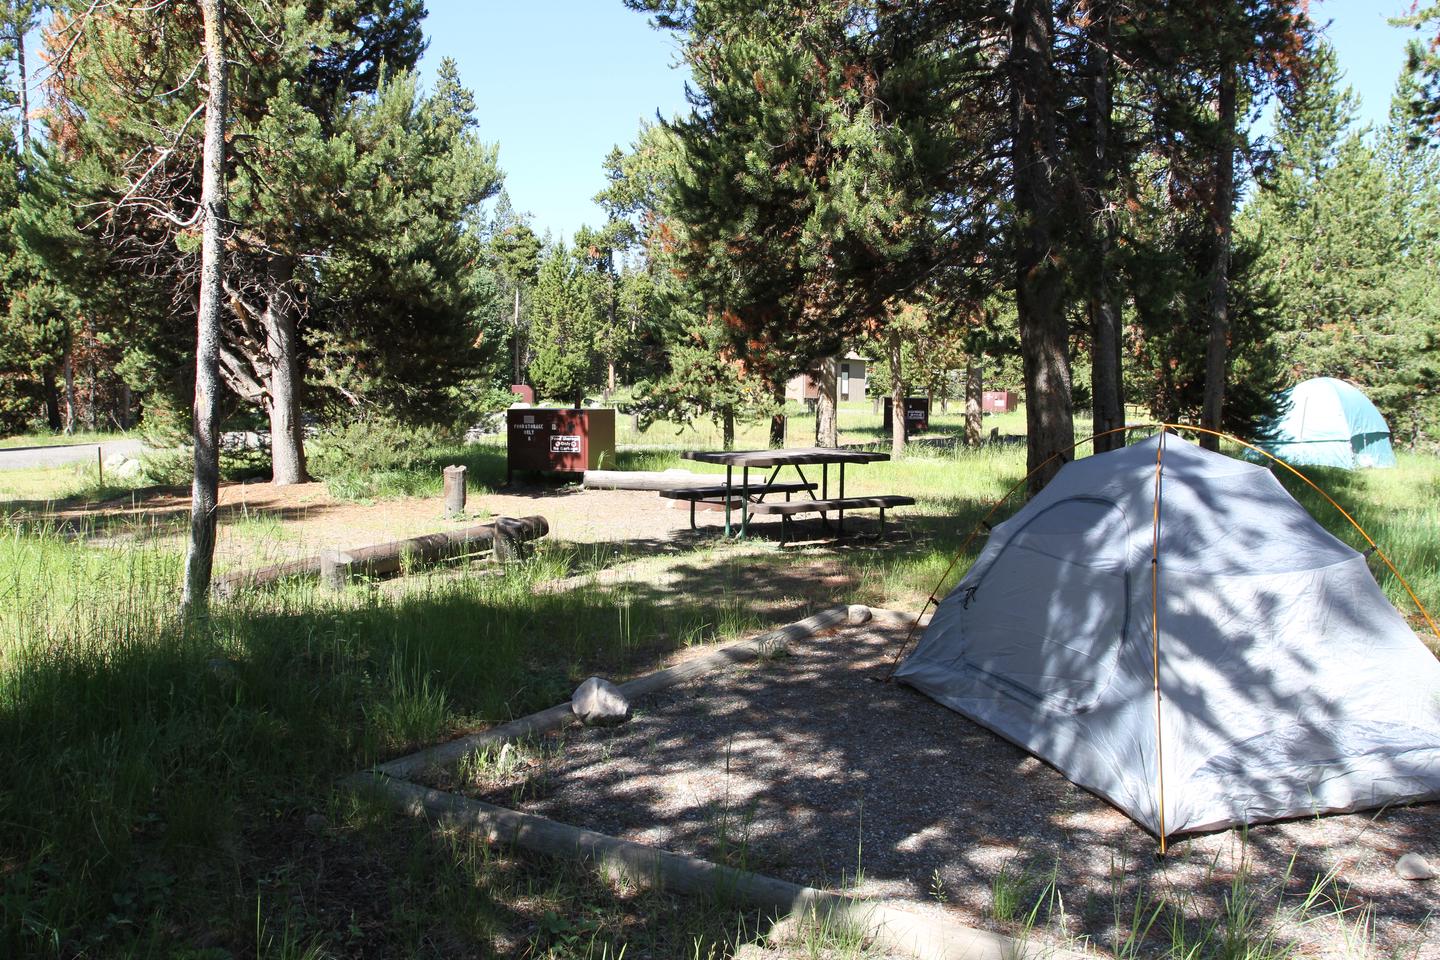 Indian Creek Campground site #6 with tent, picnic table, and bear box.Indian Creek Campground site #6